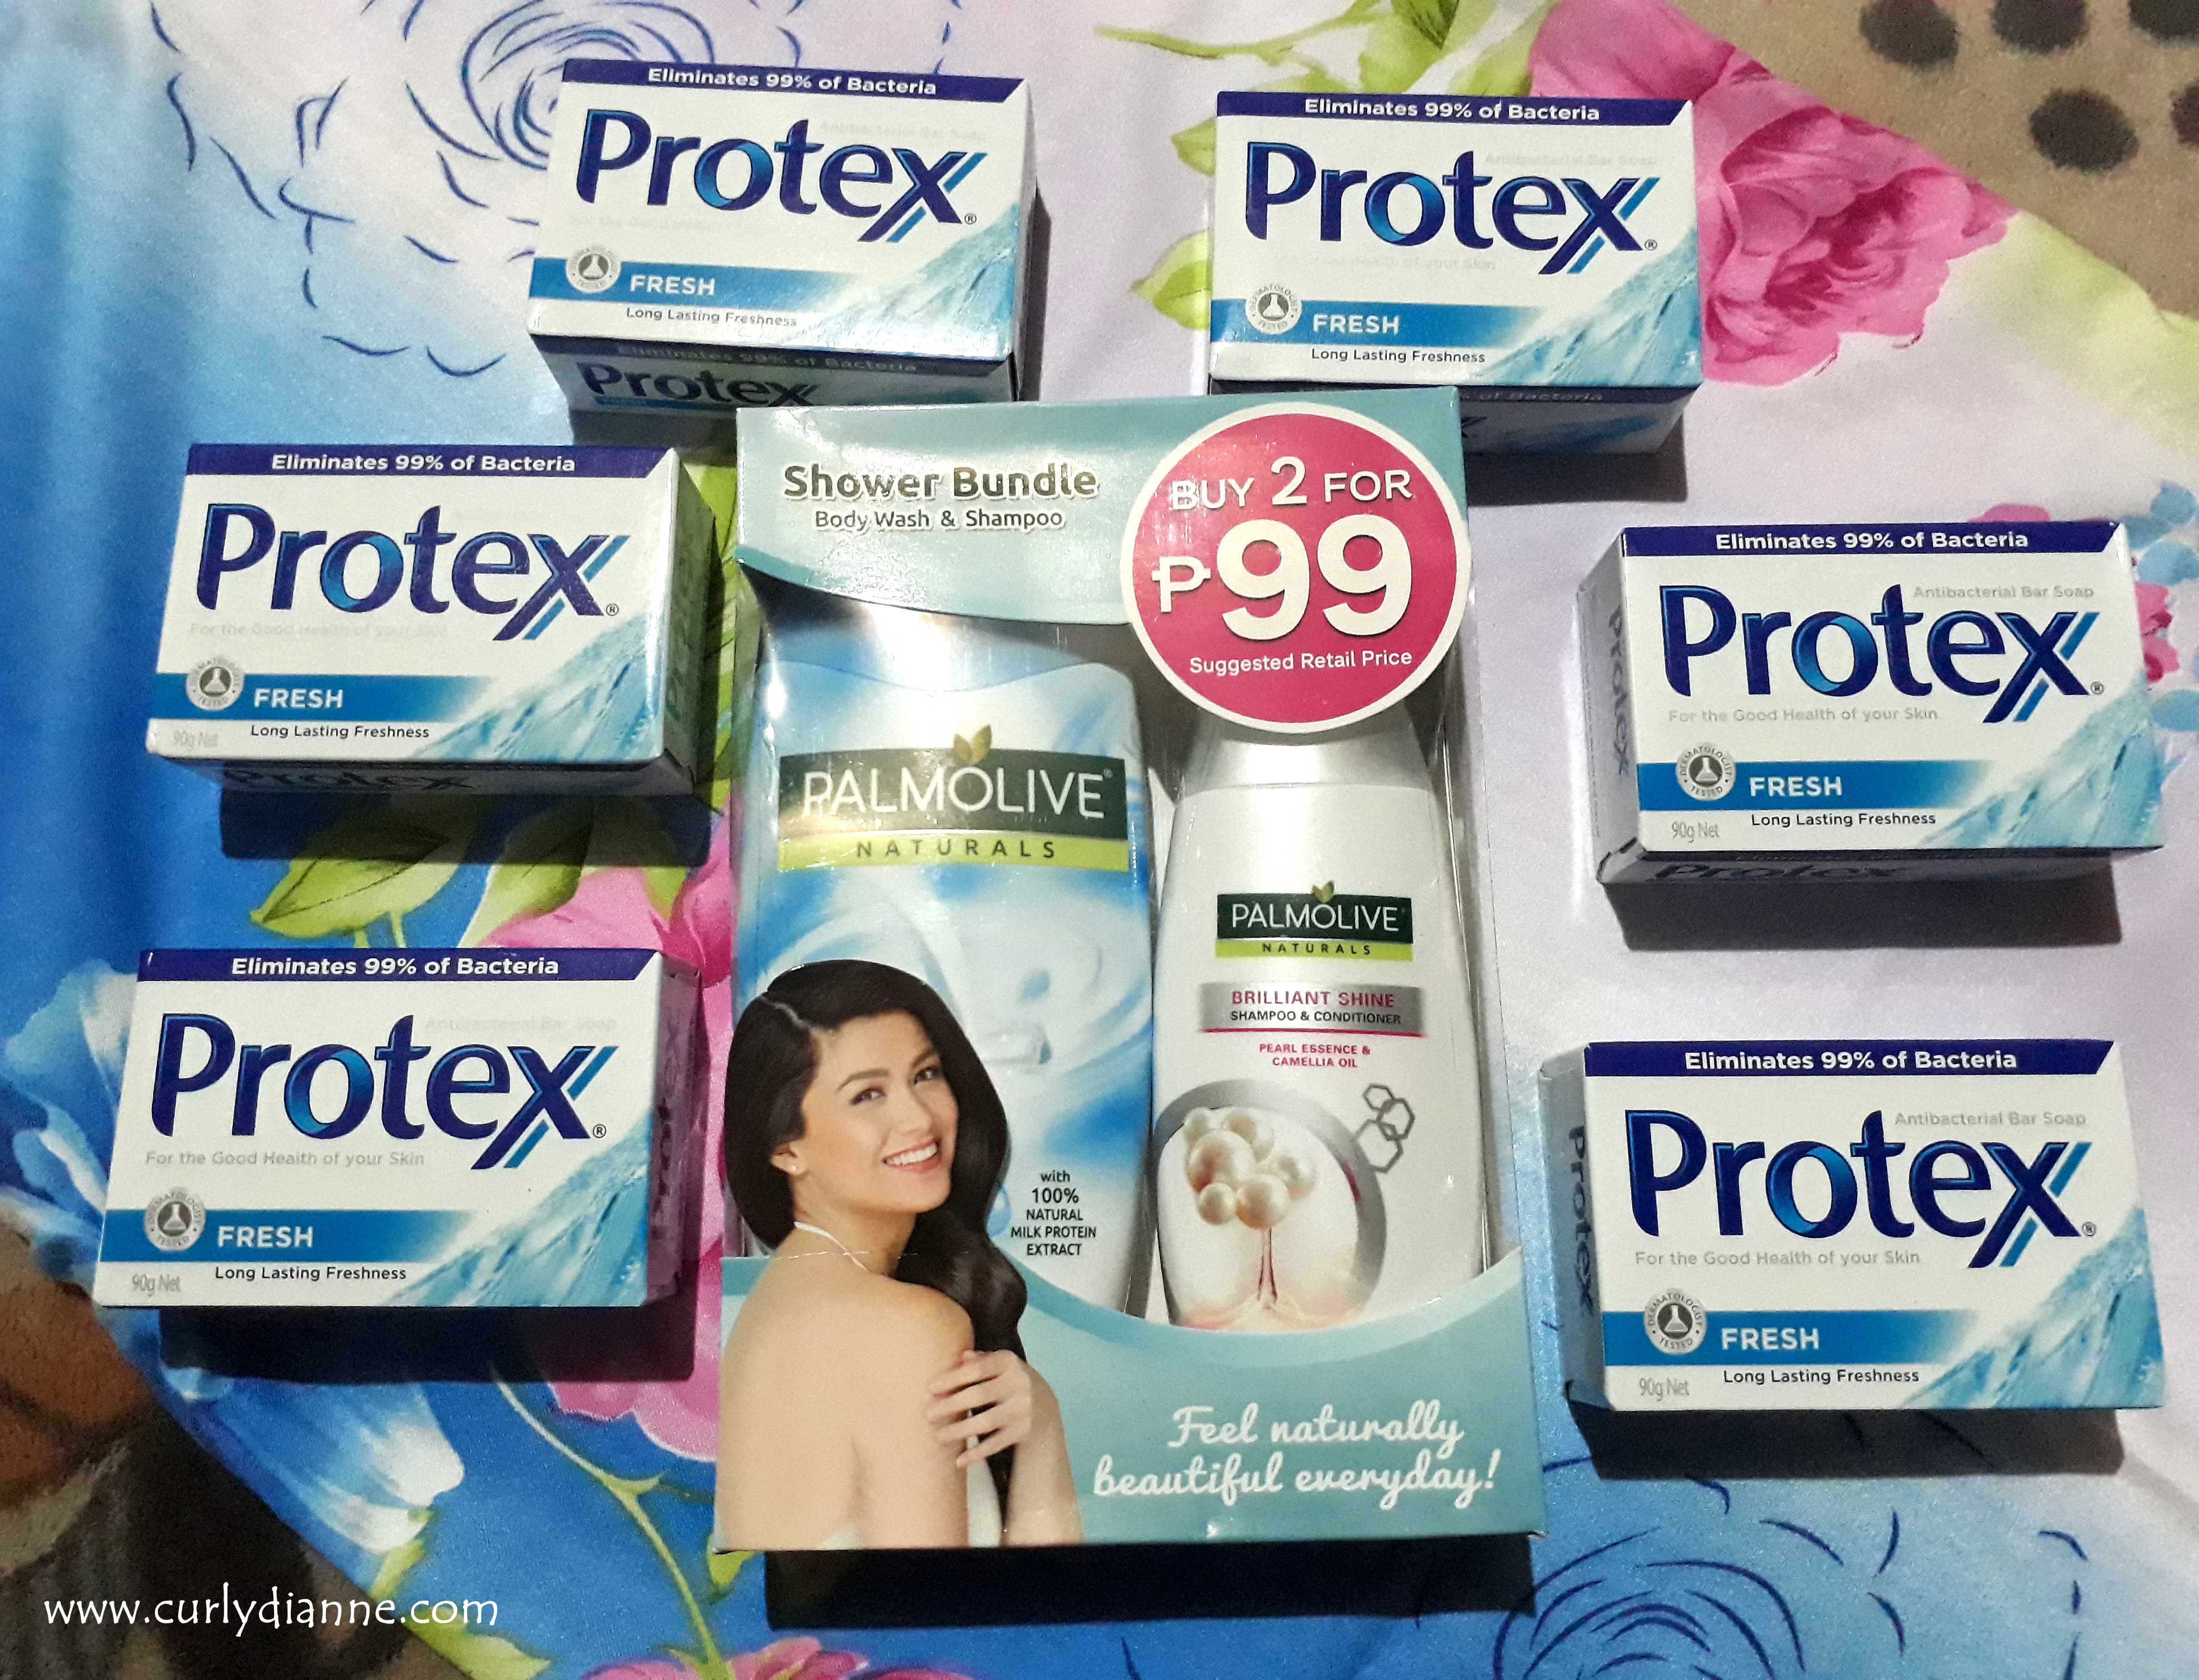 Protex bar soap and Palmolive products